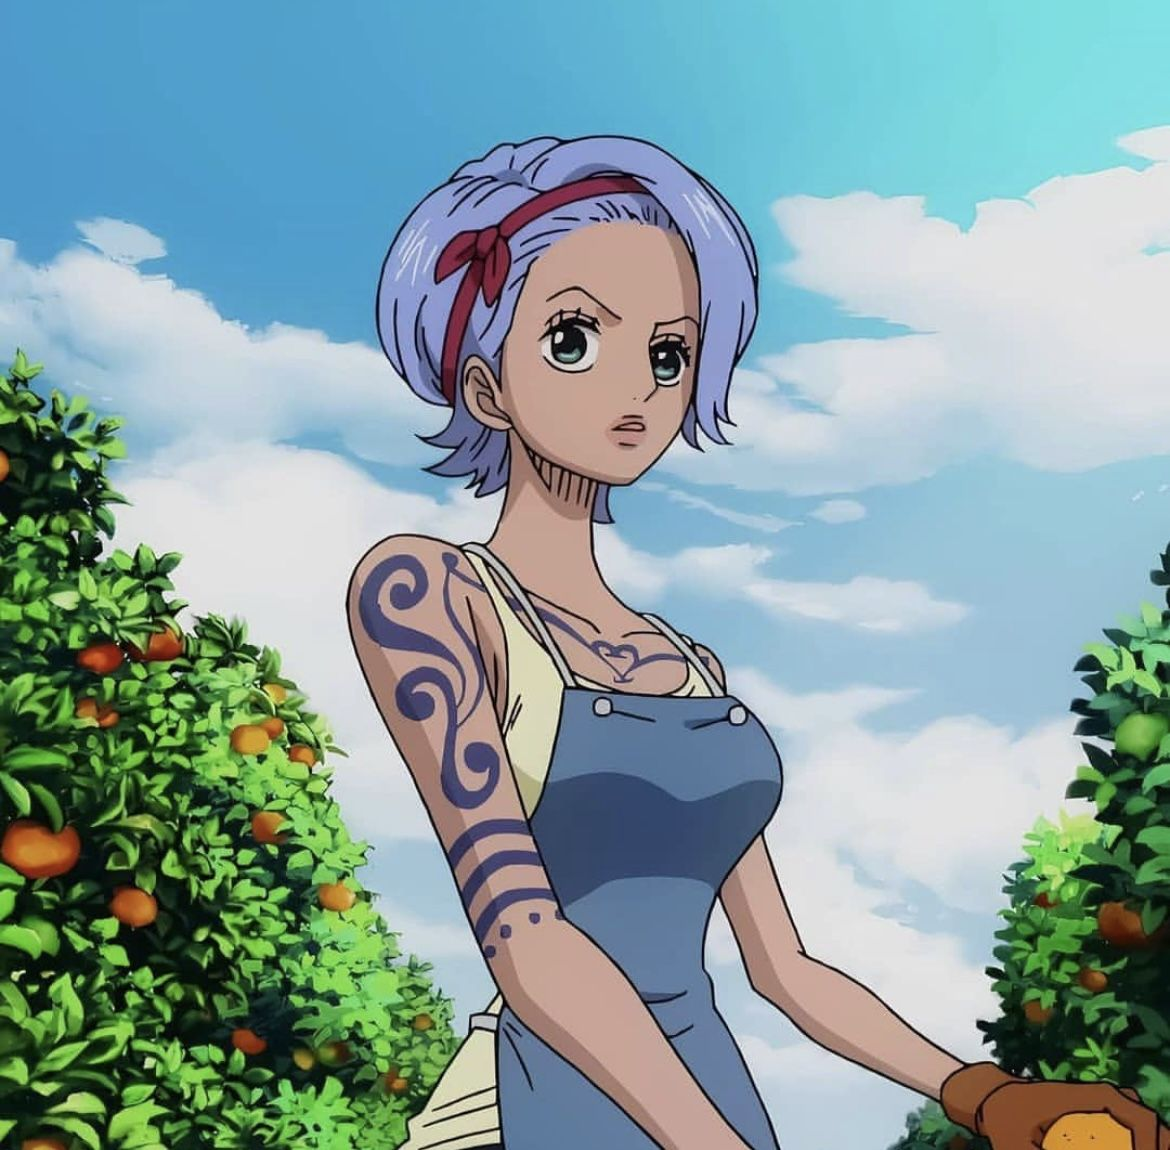 Who is Nojiko in One Piece?